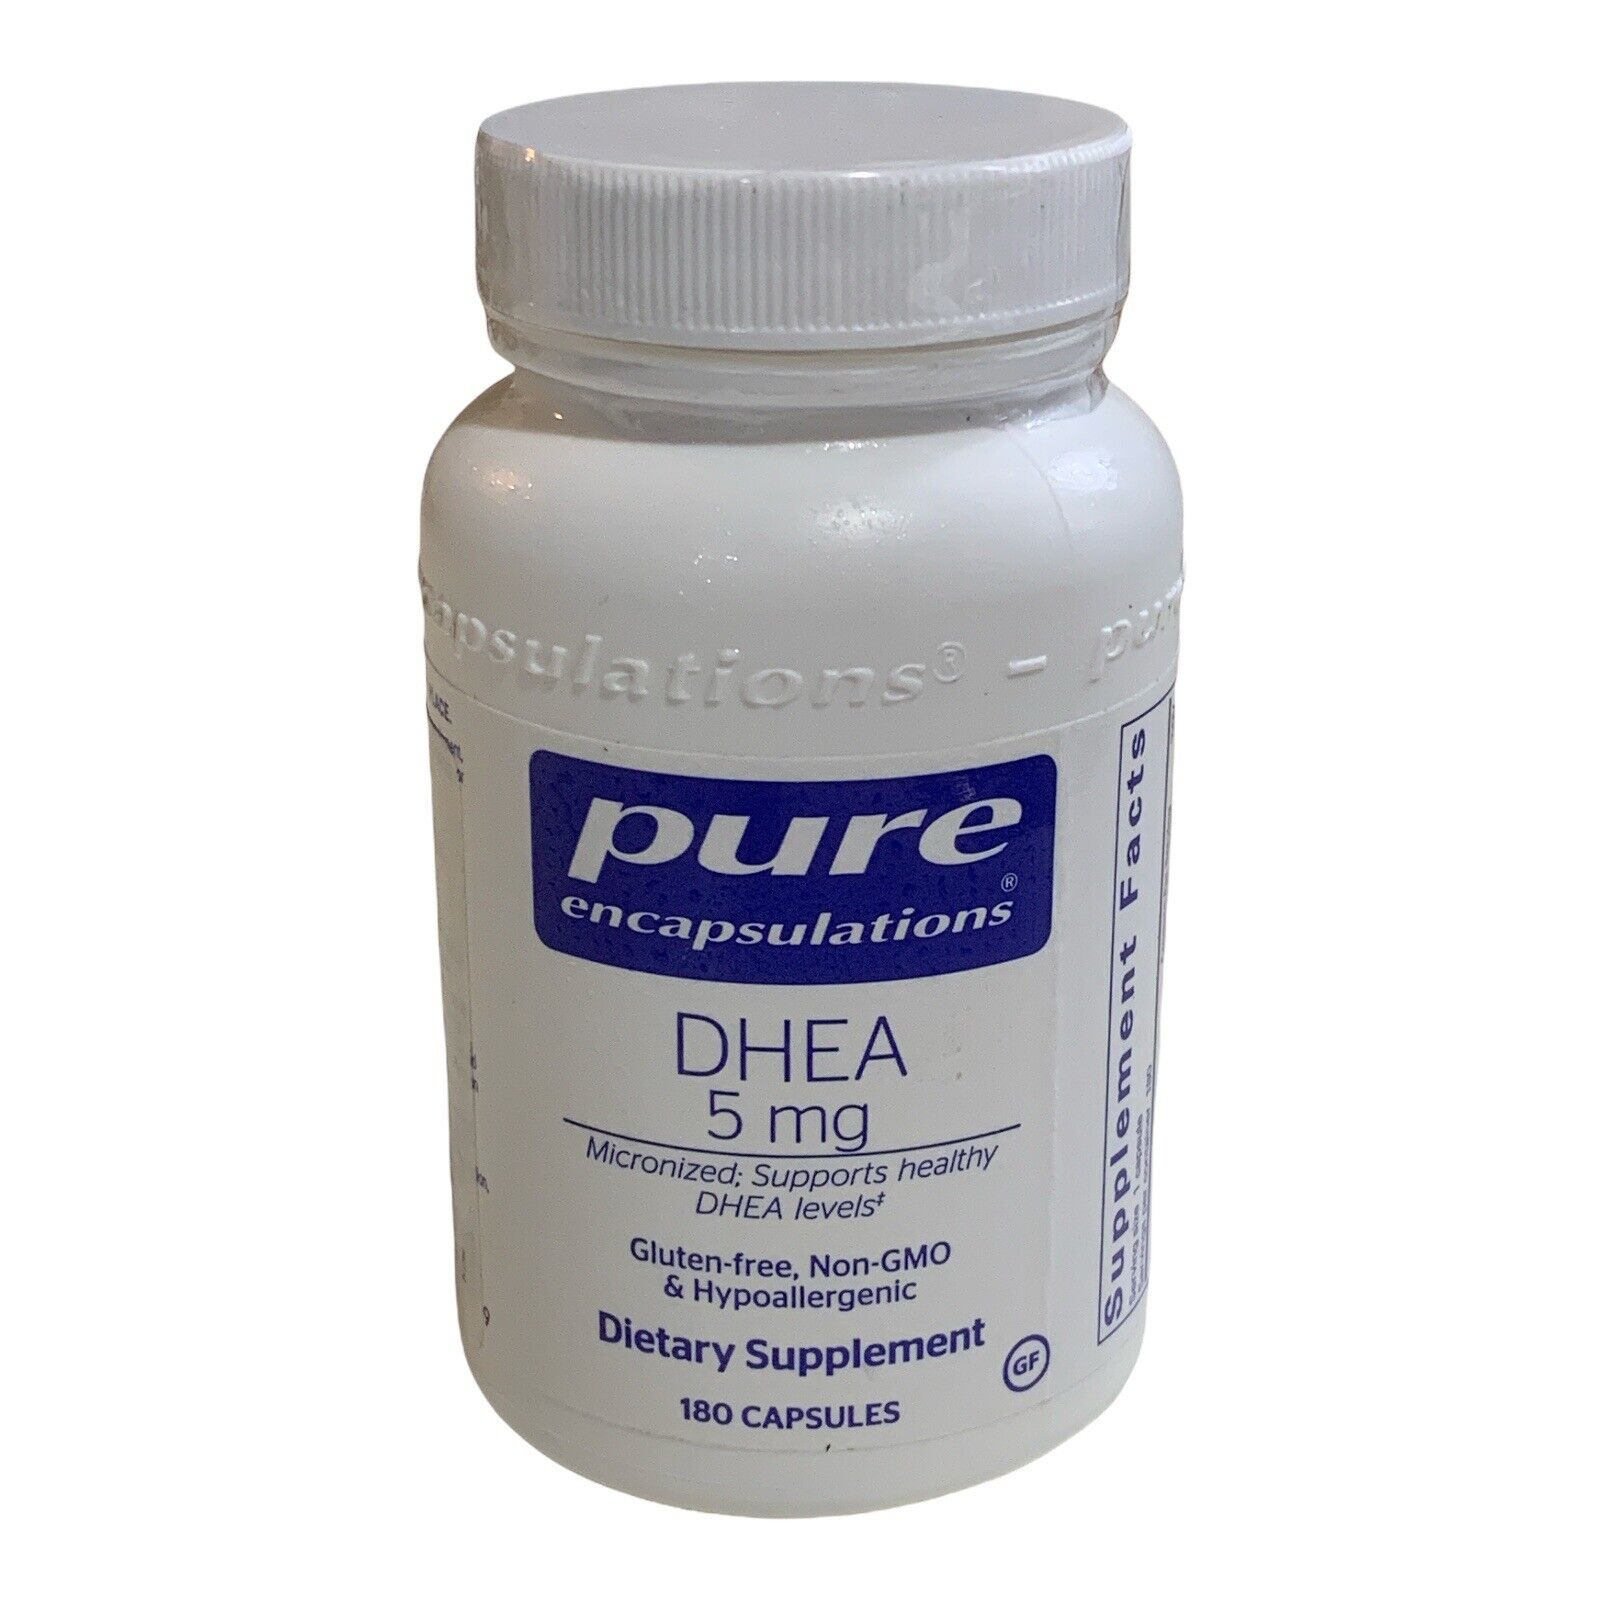 DHEA Anti-Aging 5 mg 180 Tablets by Pure Encapsulations Exp 07/2022 Free Sh